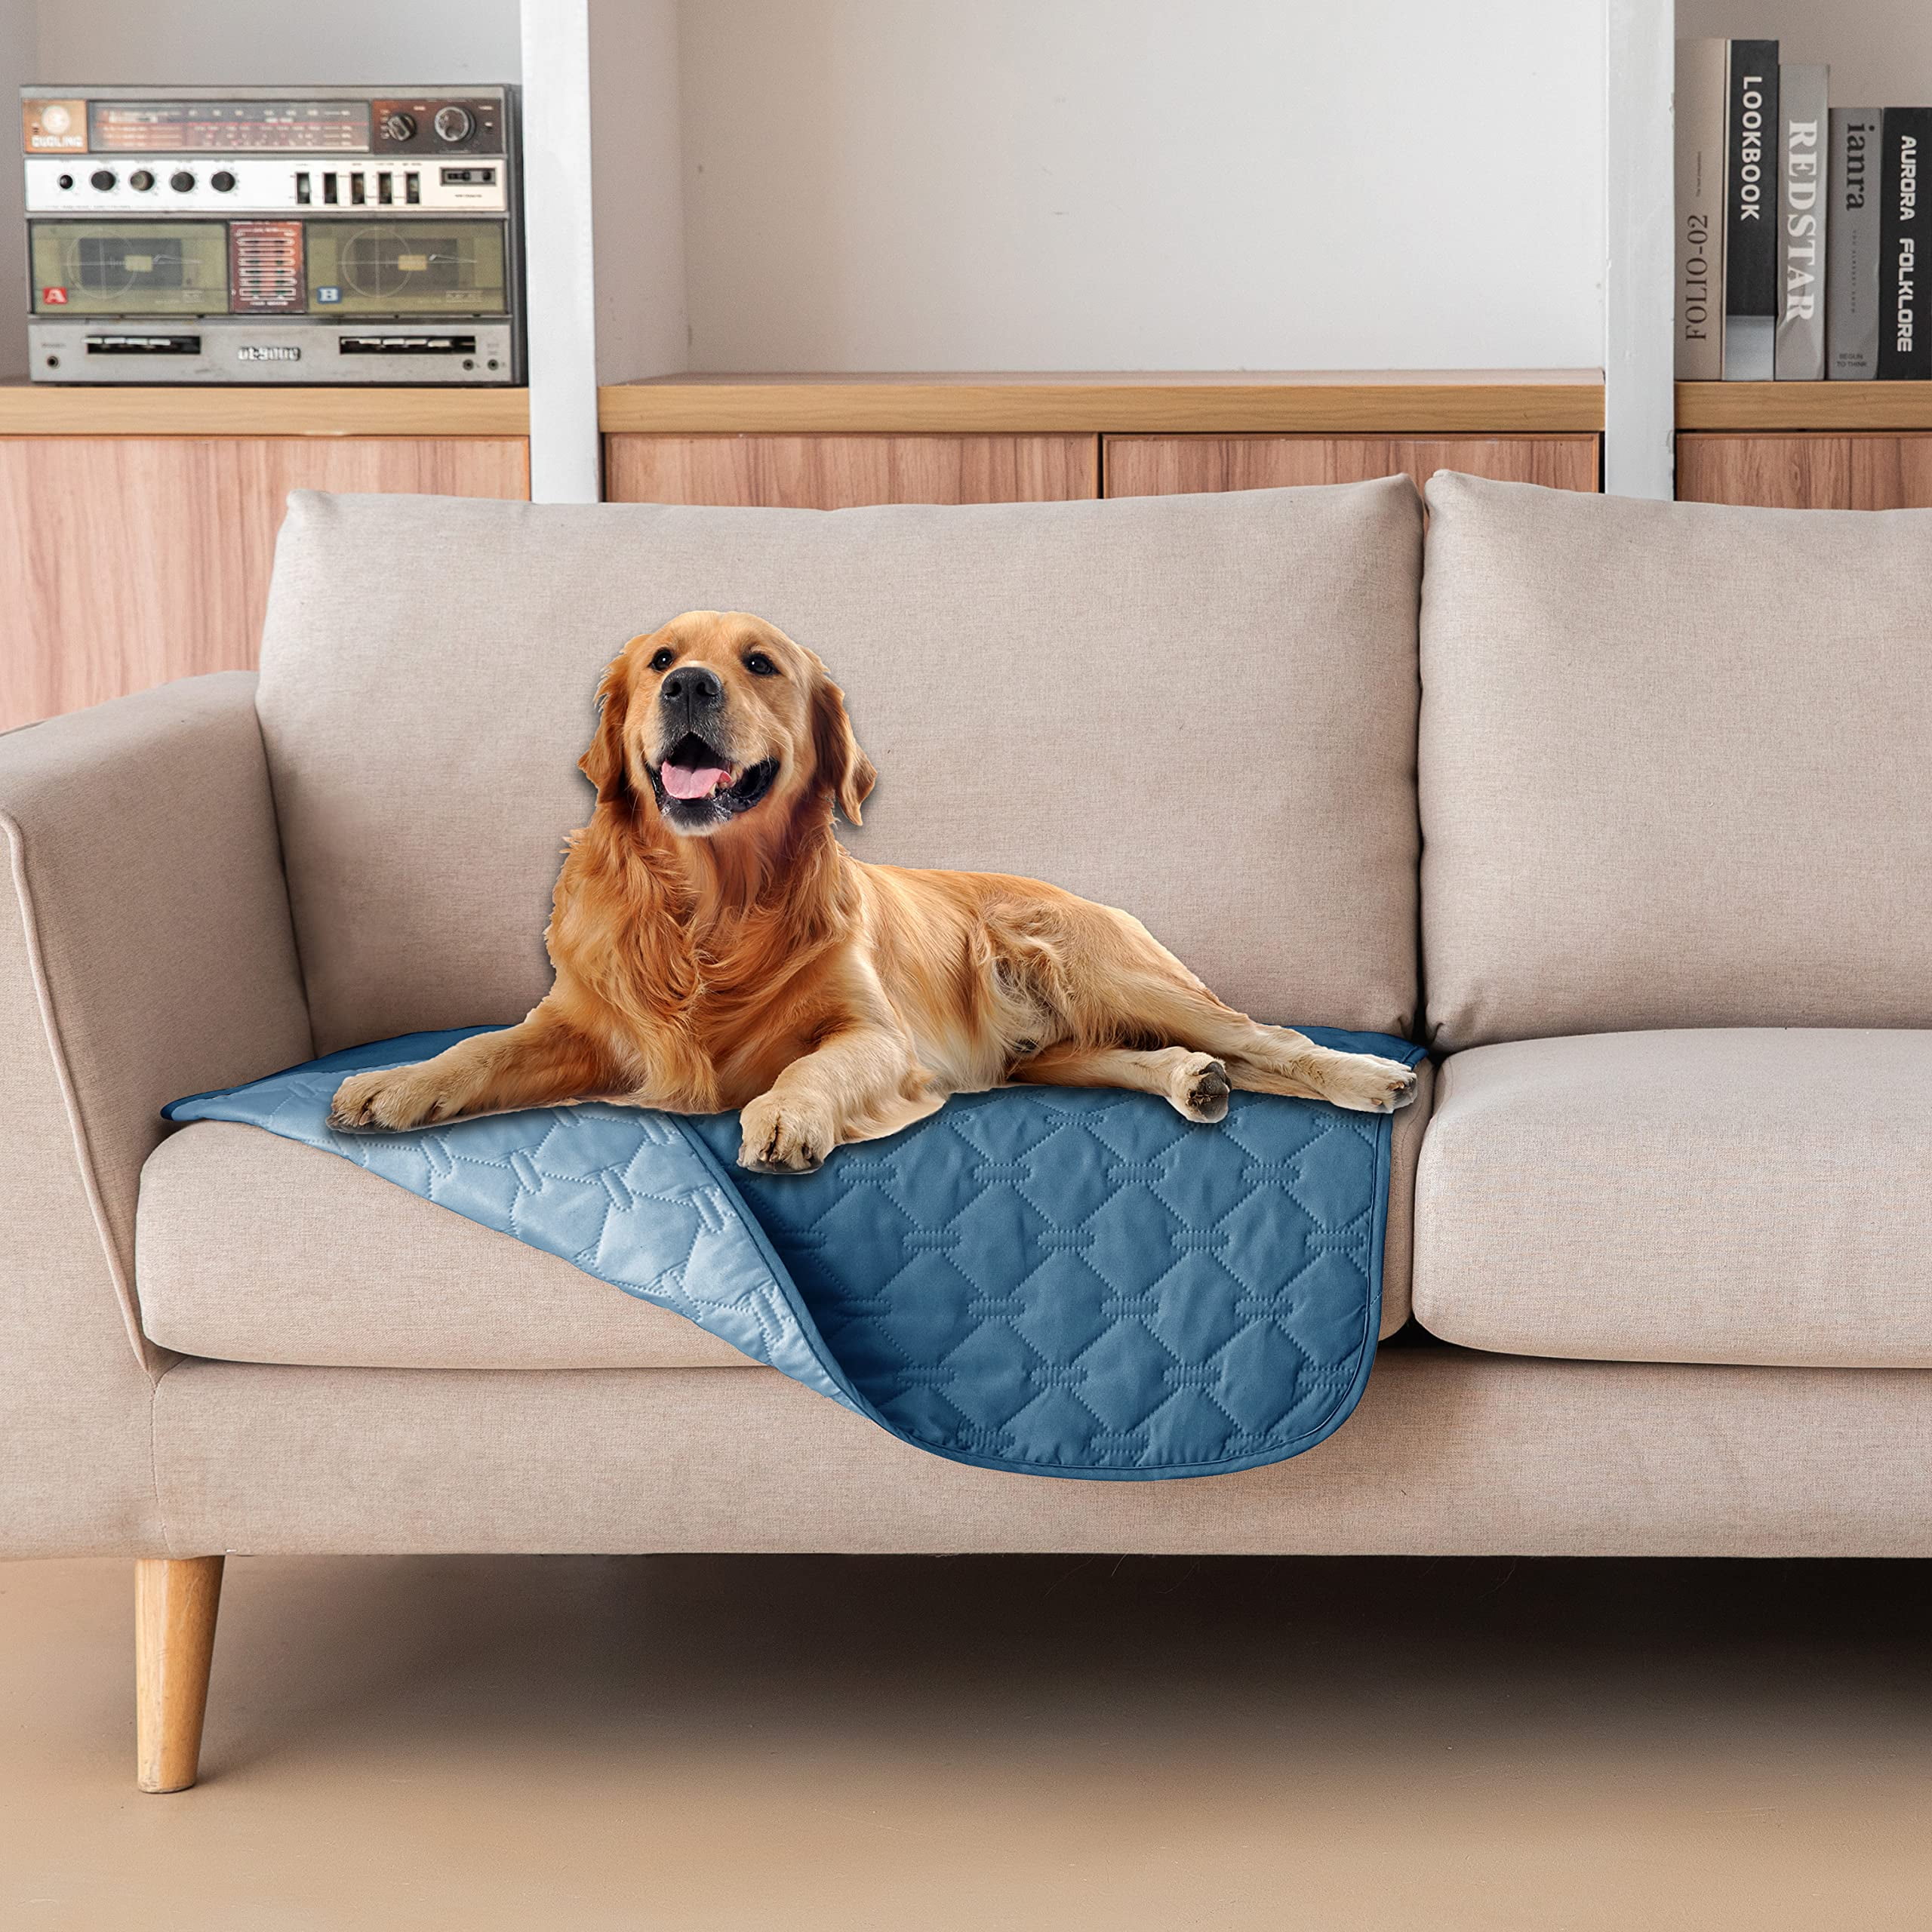 100% Double-Sided Waterproof Dog Bed Cover Pet Blanket Sofa Couch